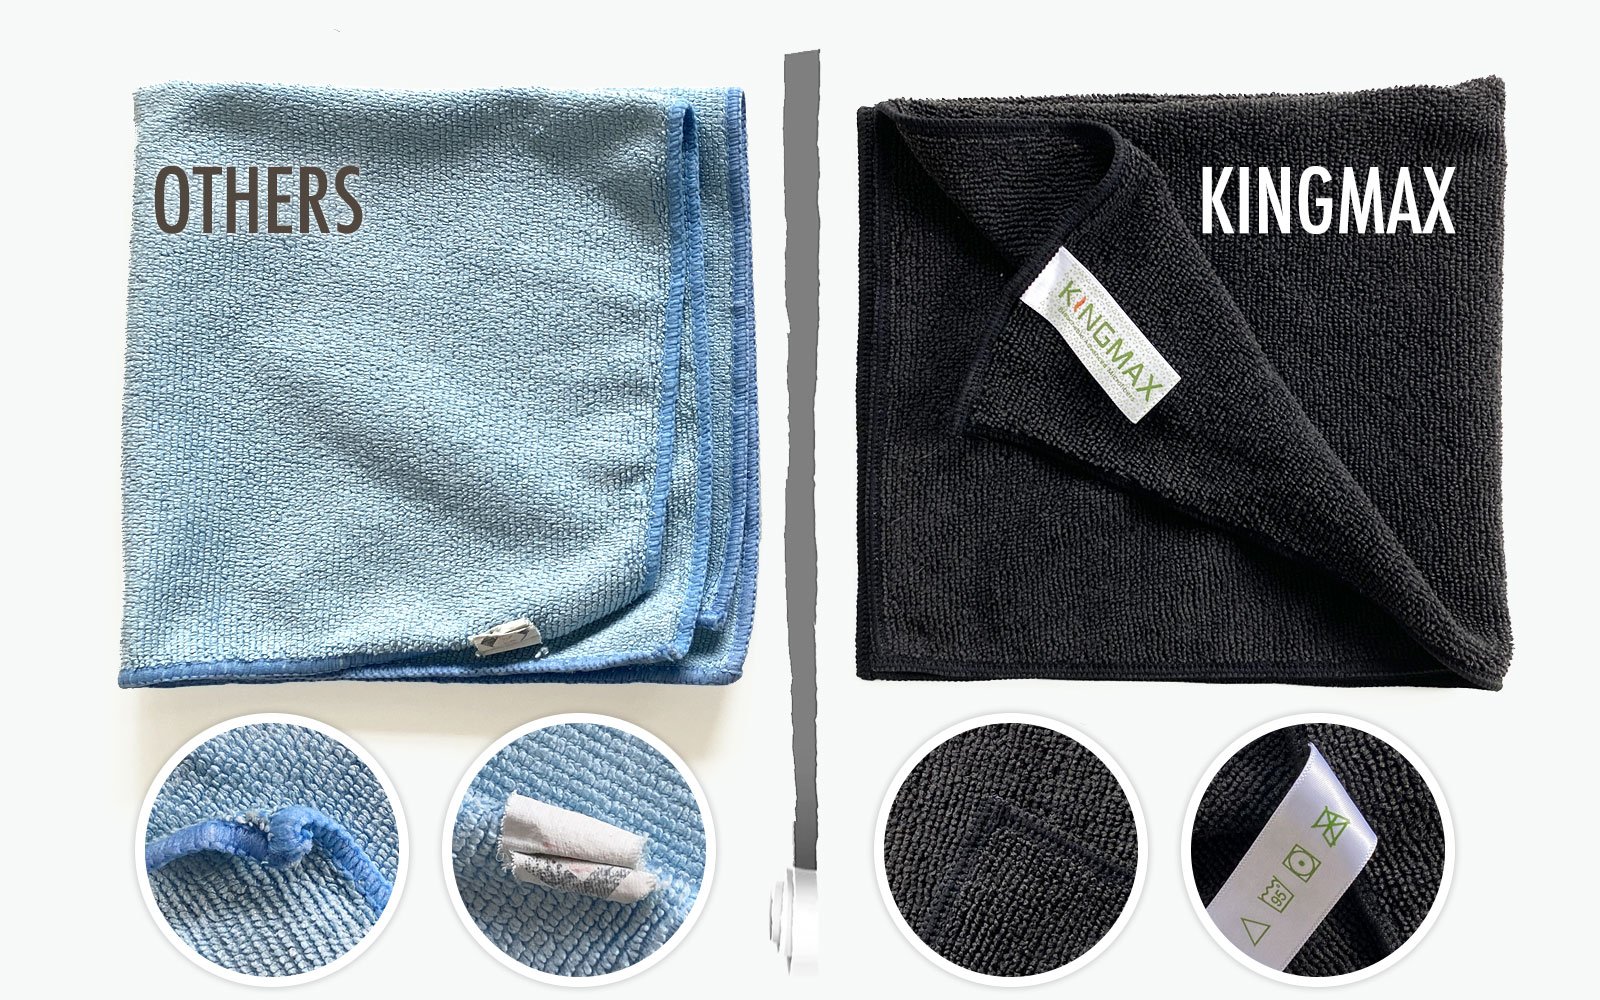 KINGMAX Great Towel is an eco-friendly durable towel that made from AA recycled microfiber yarn that can hold shapes and detail qualities after hundreds of laundry. Besides, it is also a bleachable and antibacterial cleaning cloth.